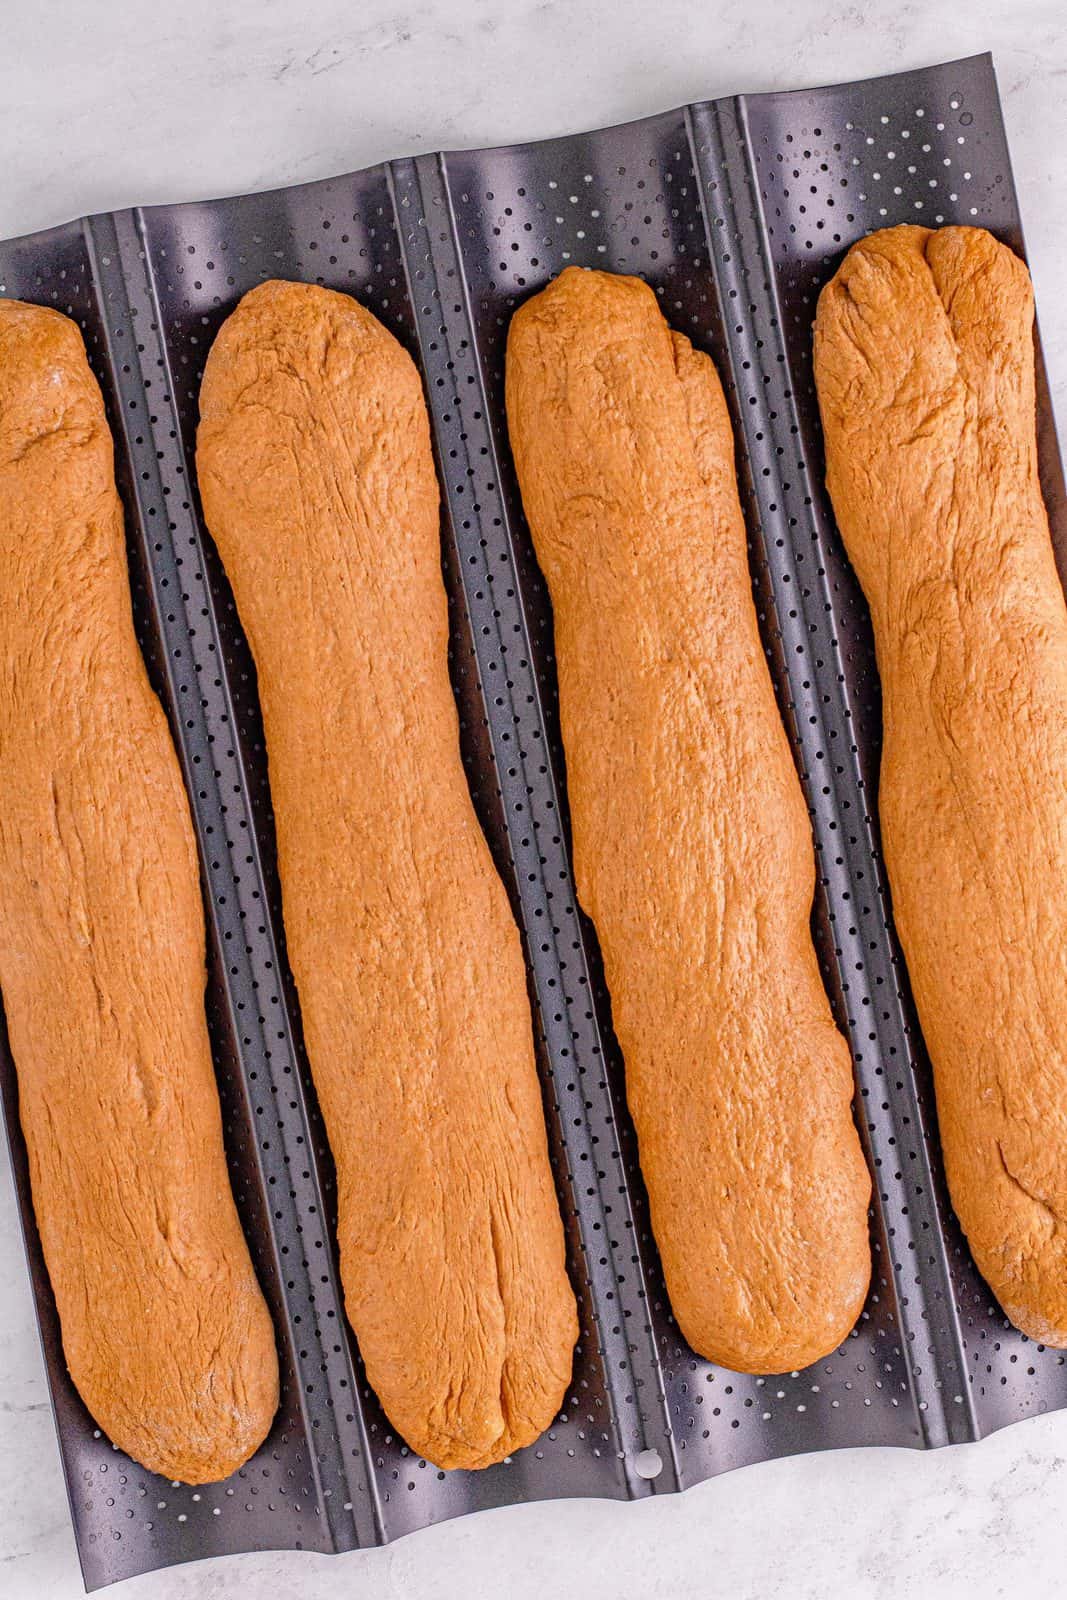 Logs of bread dough placed on a baguette pan.